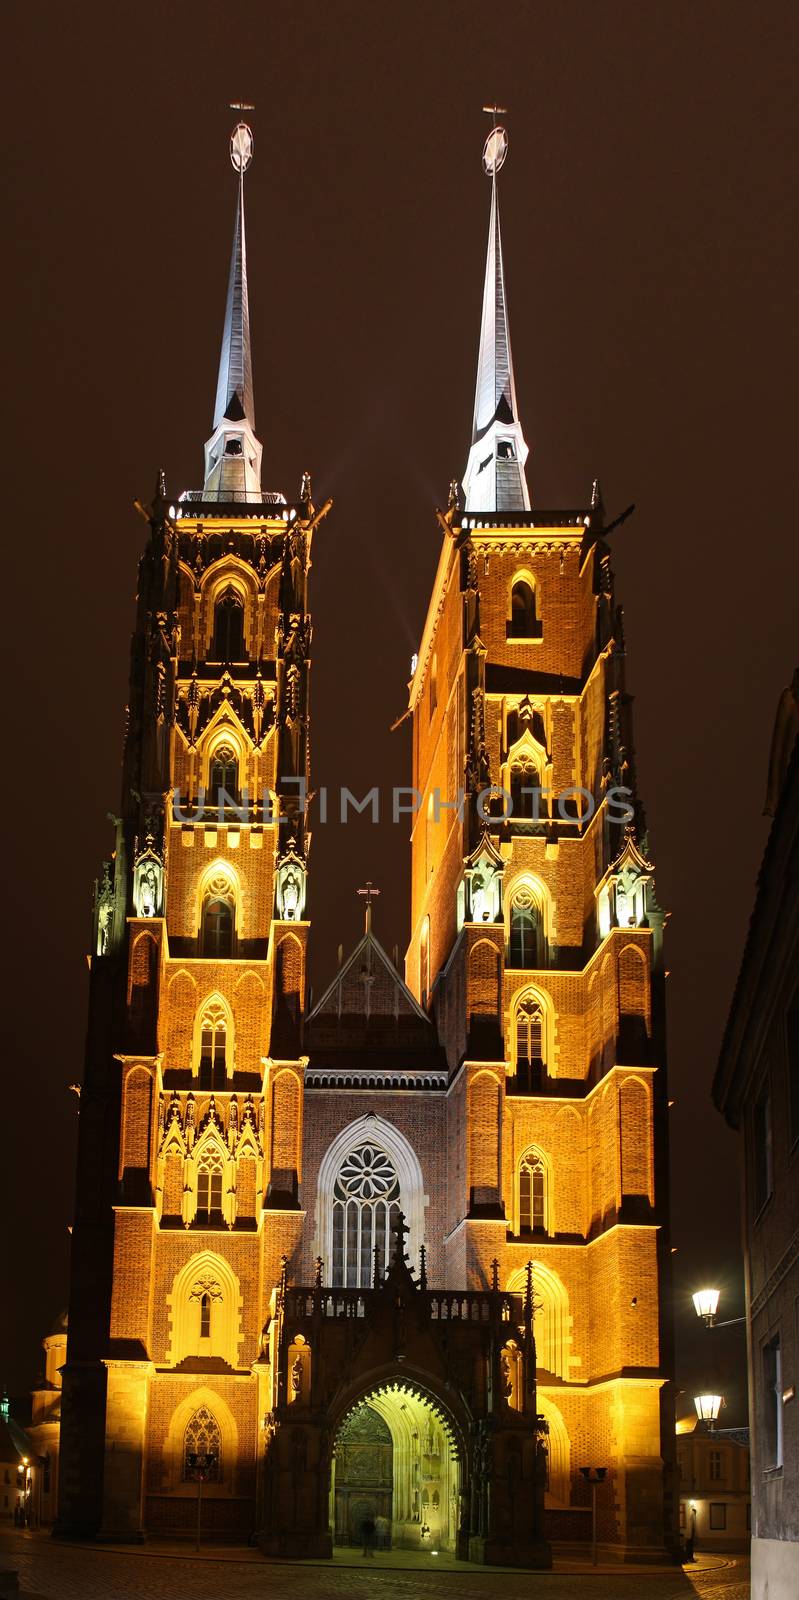 Wroclaw cathedral by Aarstudio